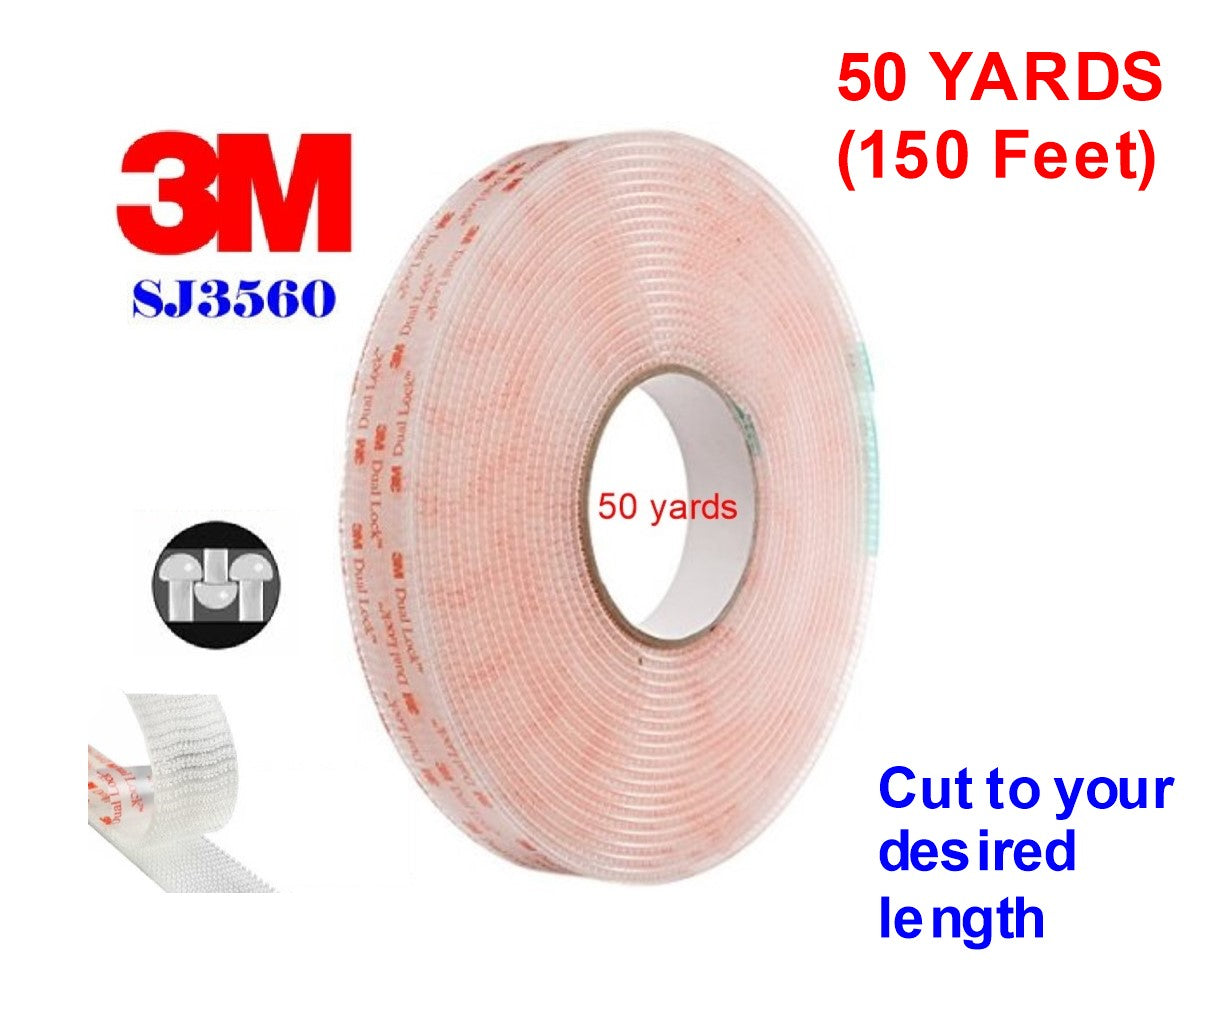 1' x 50 Yd. Double Face Tape